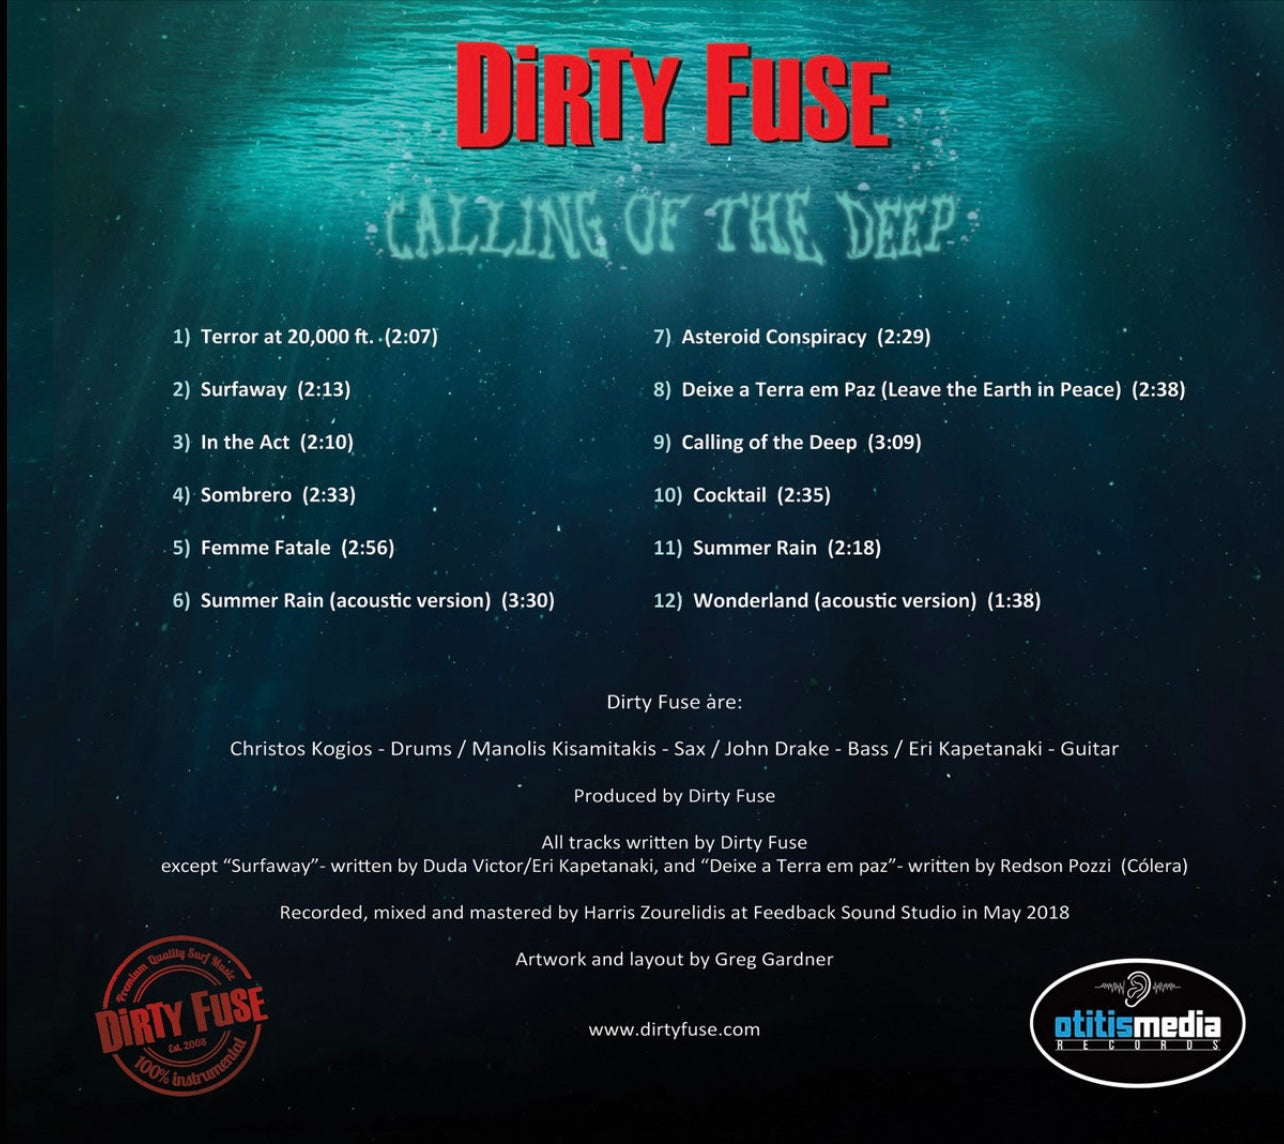 OMR-006 DIRTY FUSE “Calling of The Deep” CD